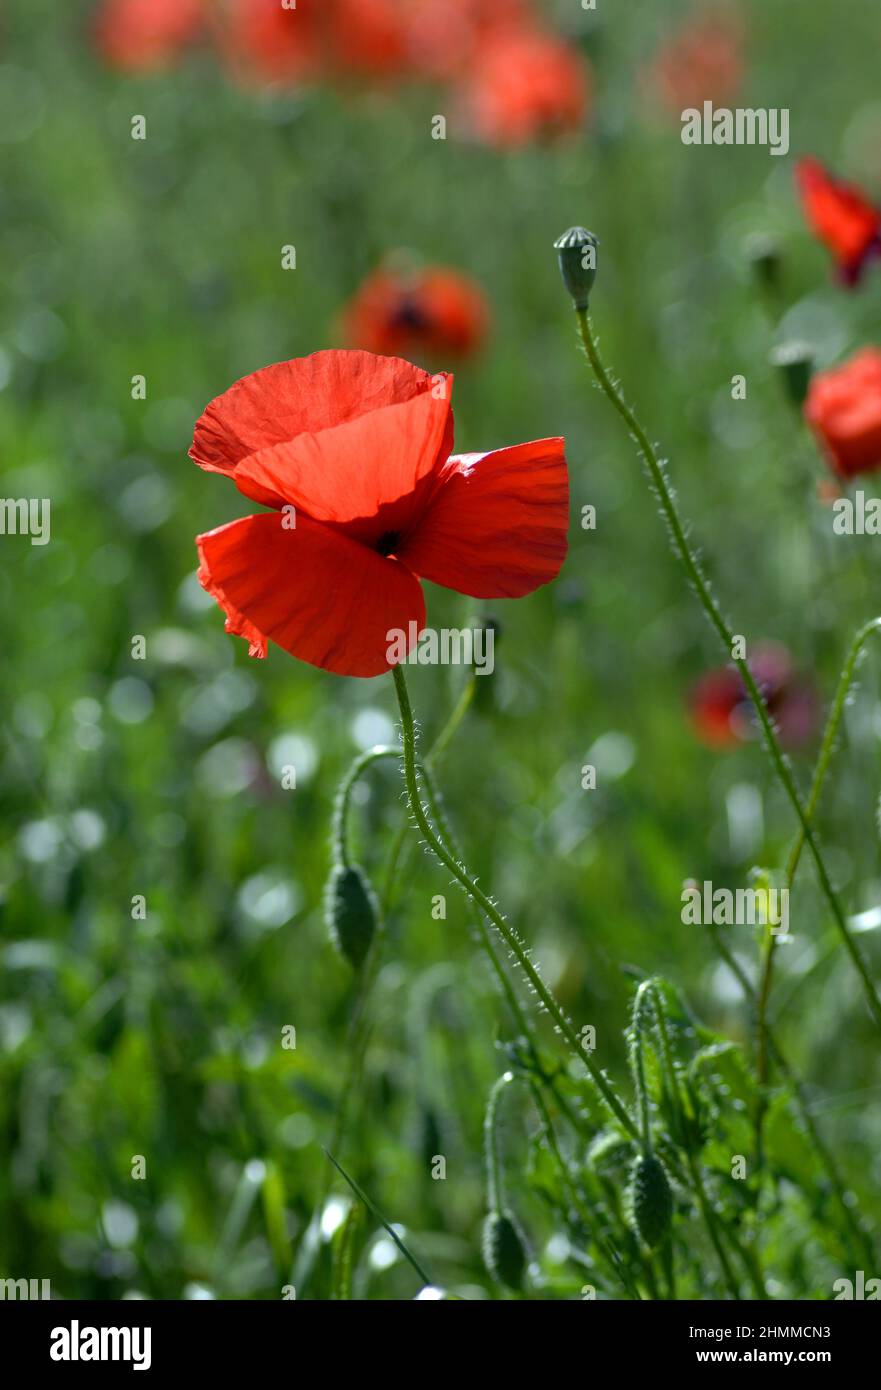 FRANCE Pyrenees Orientales spring poppies Stock Photo